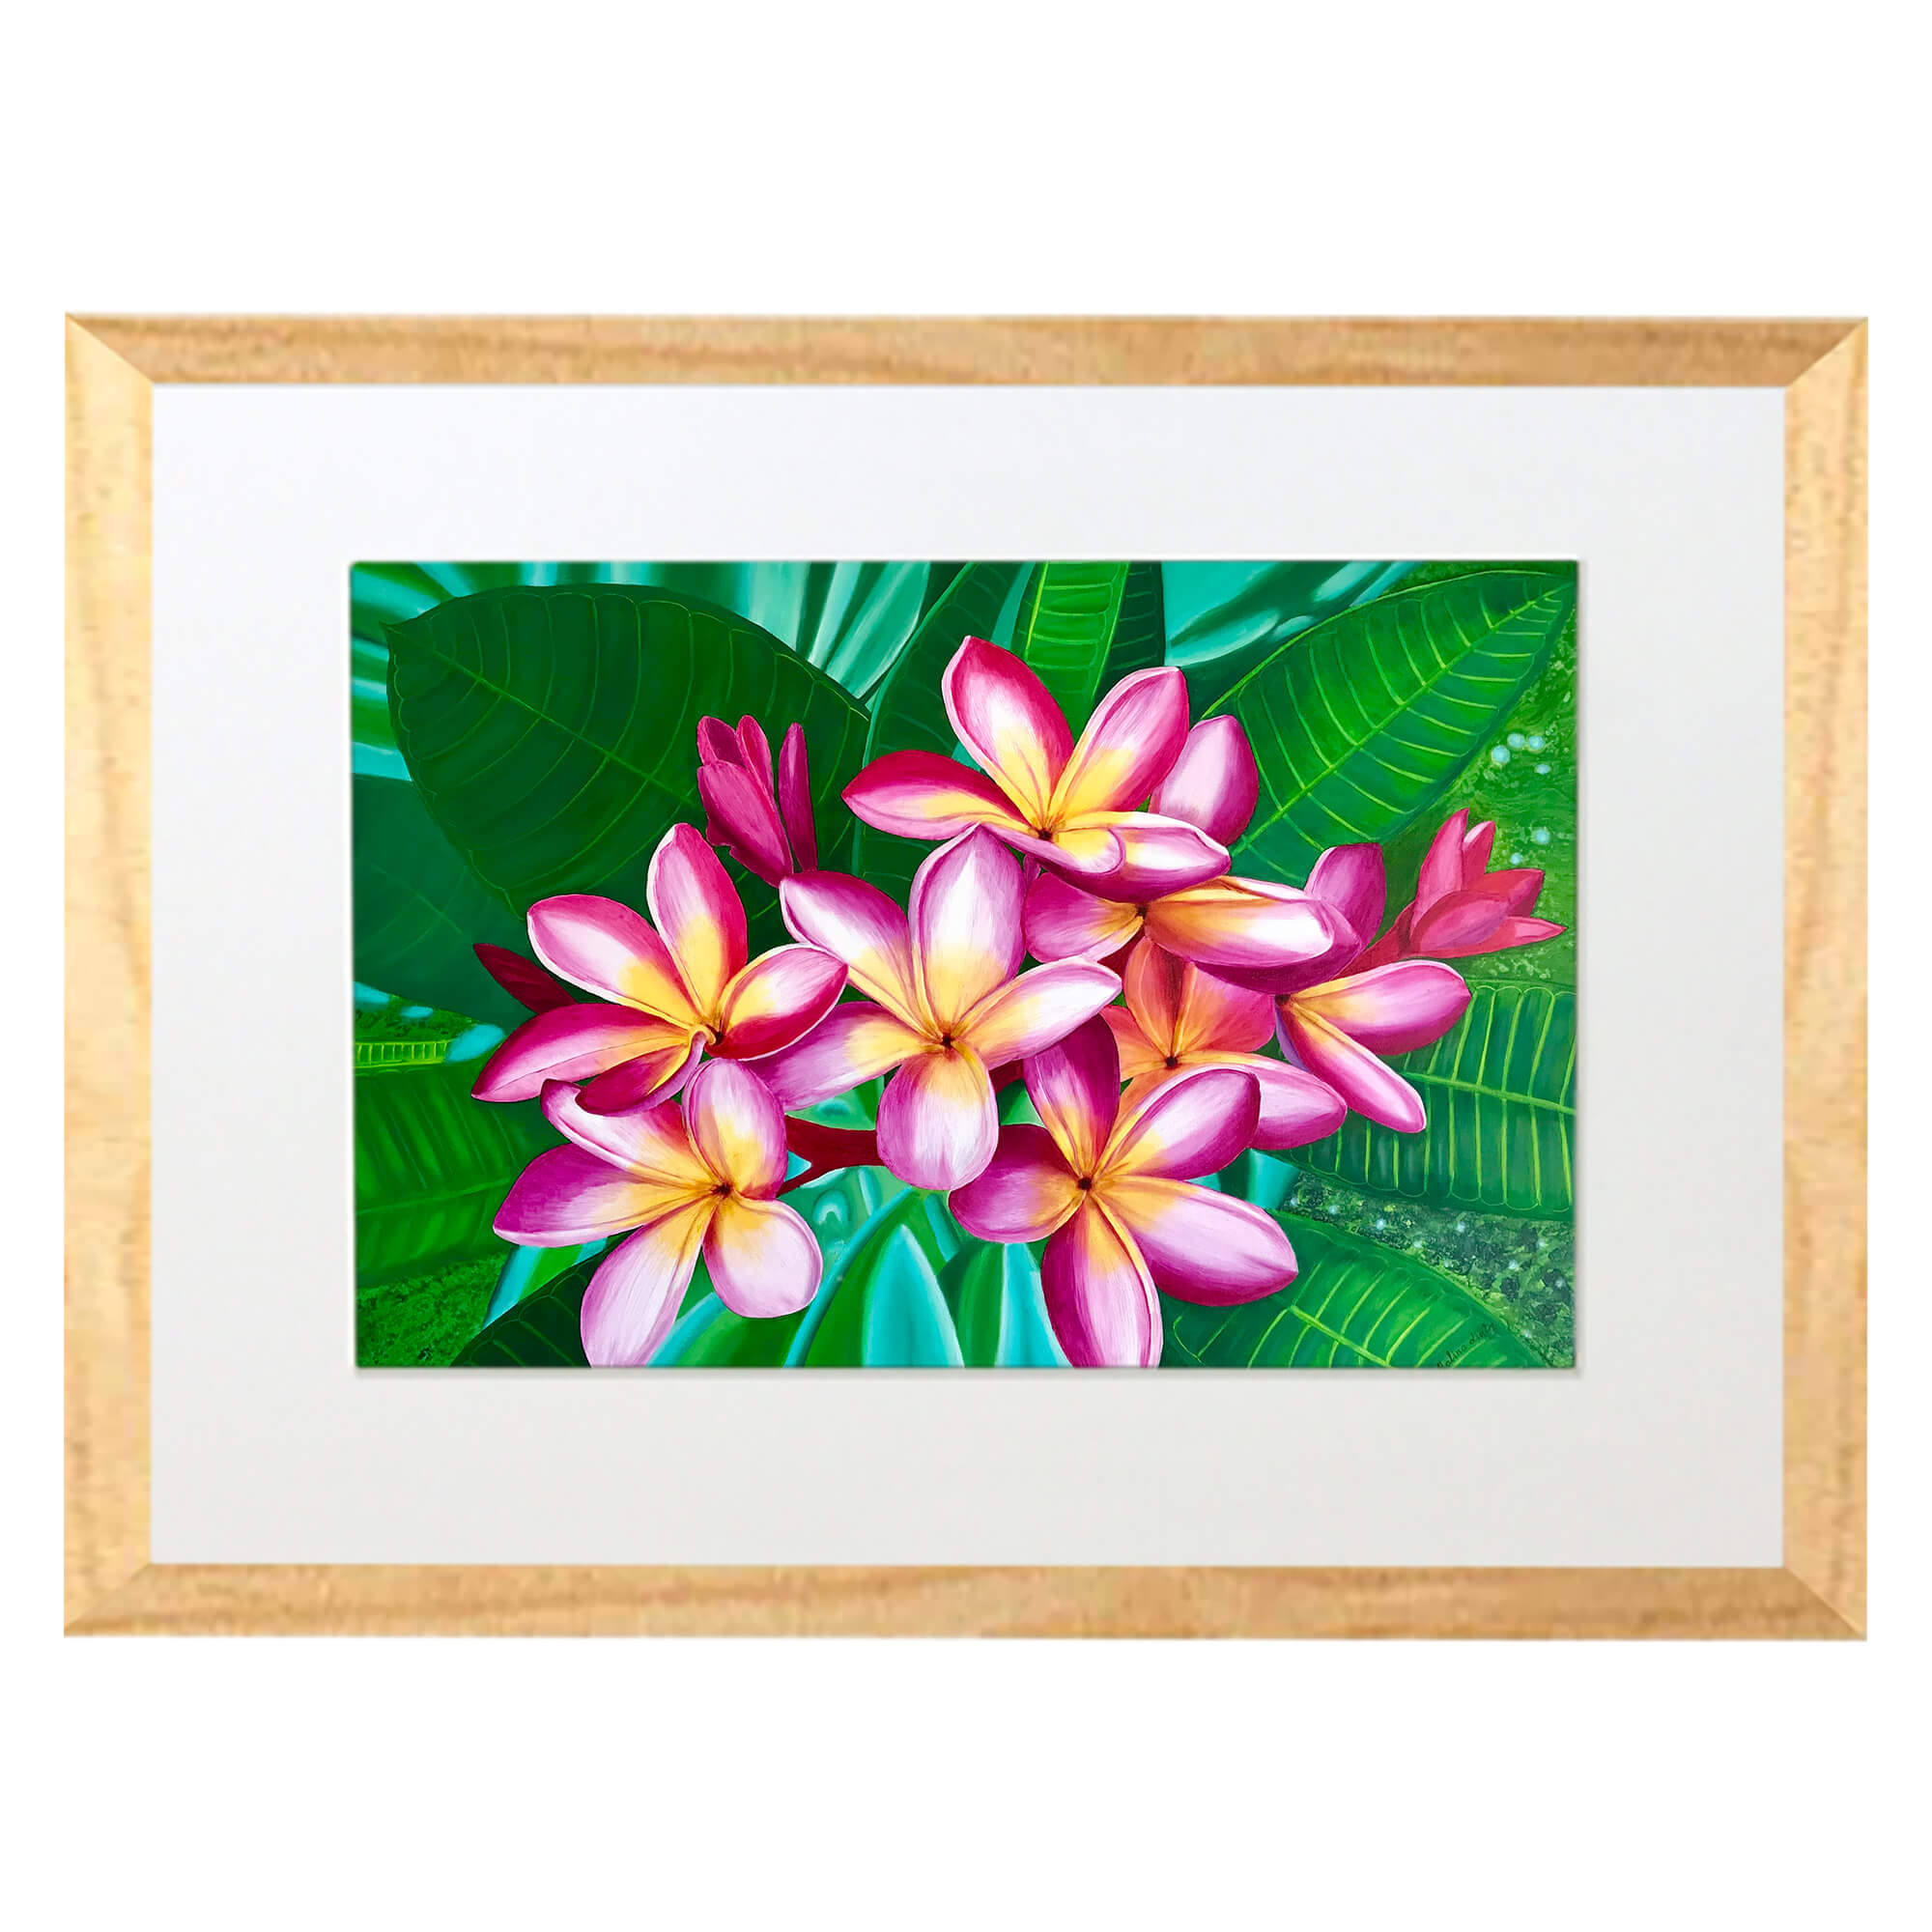 Matted art print with wood frame showcasing magenta flowers blooming by hawaii artist Galina Lintz 